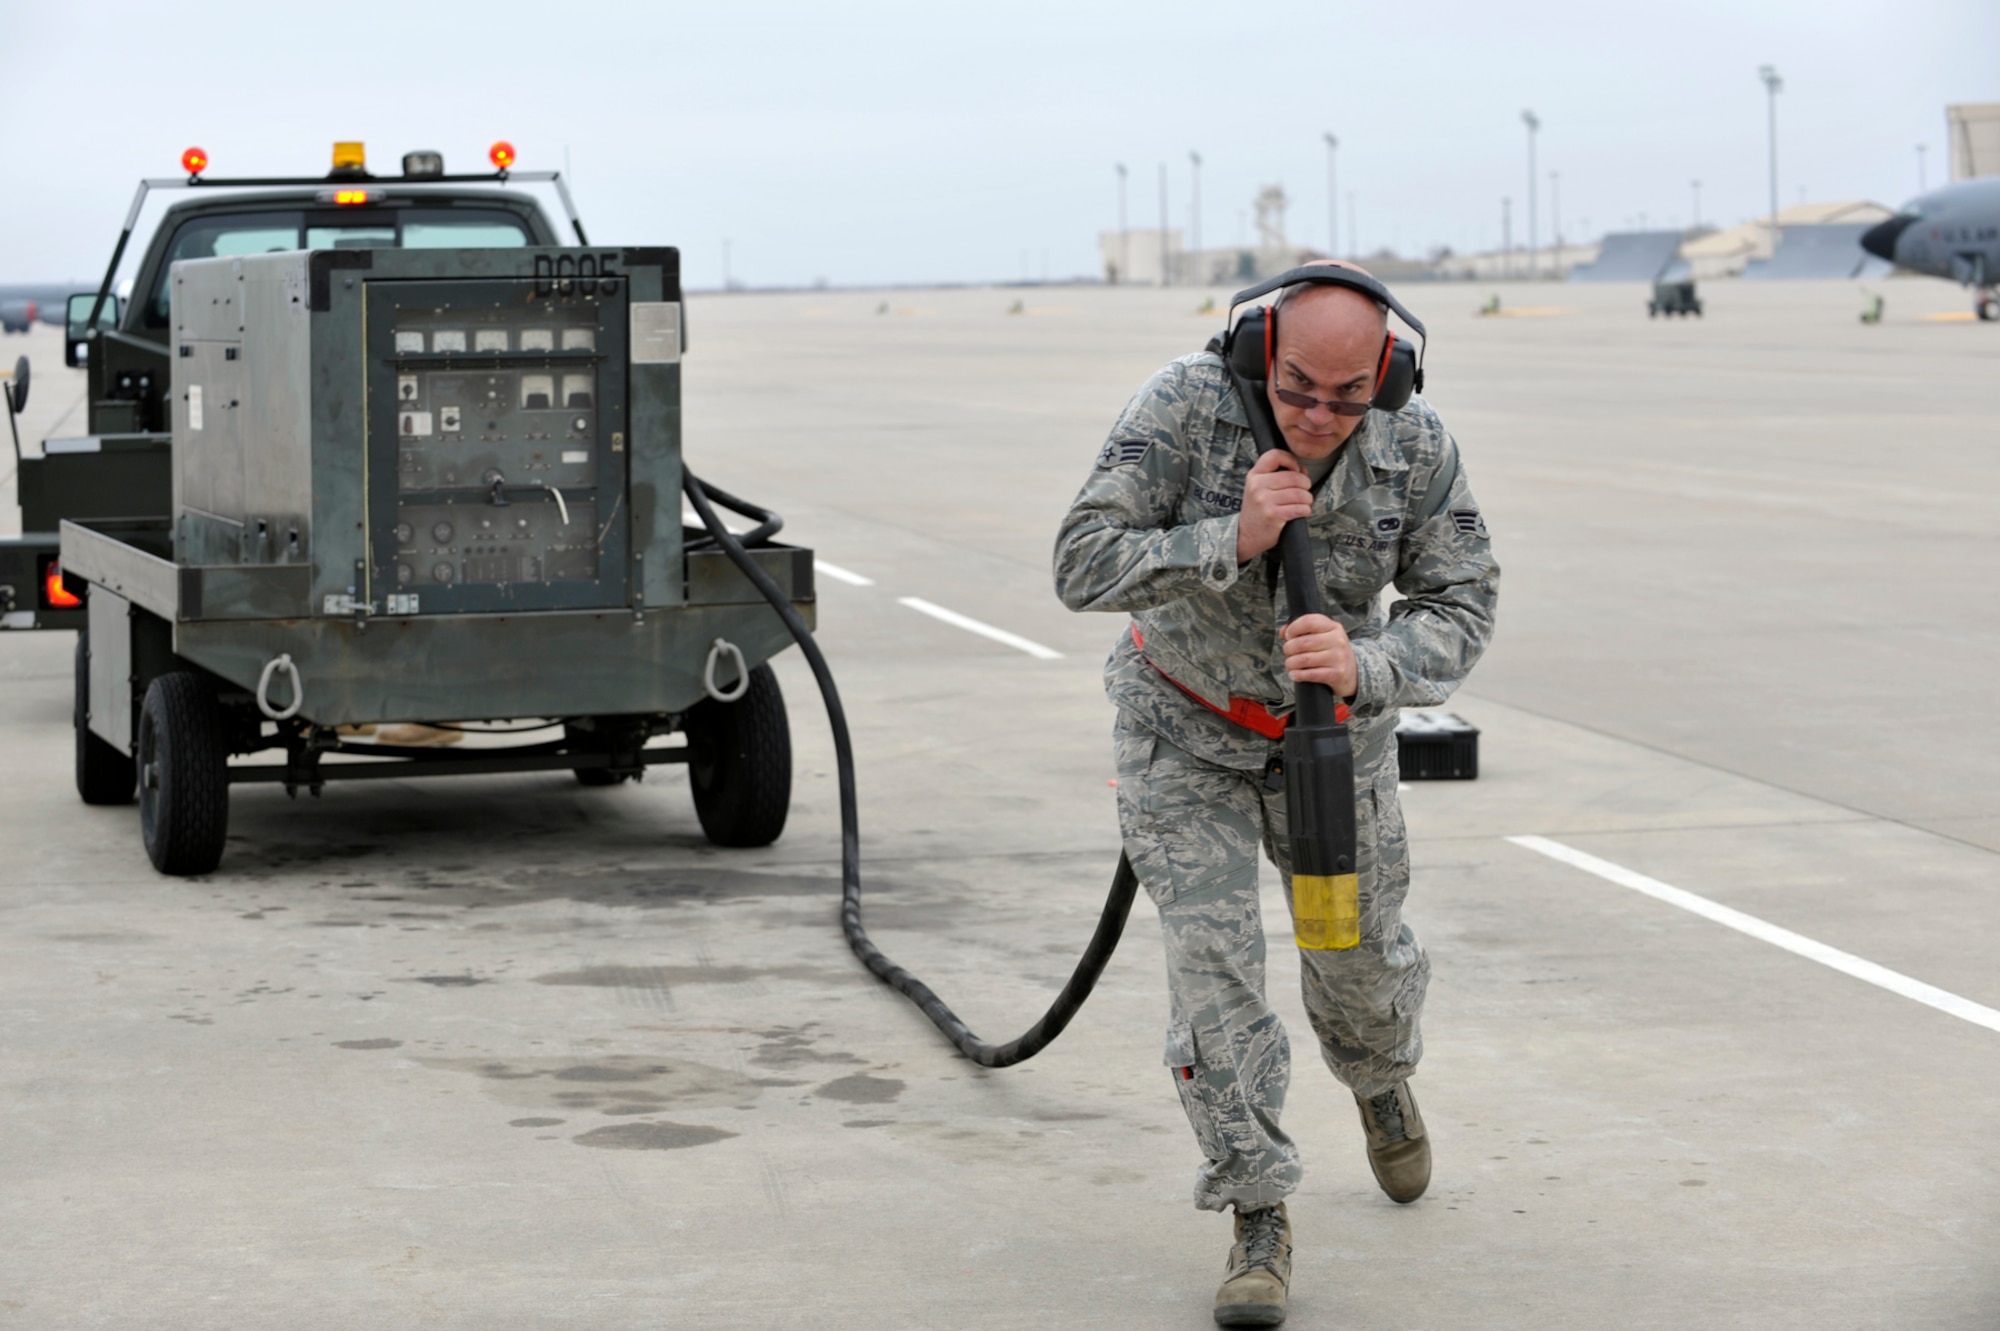 Senior Airman Daniel Blondell carries a power cable to a KC-135 Stratotanker on the flightline here on Nov. 10, 2009, the same day as the 234th birthday of the U.S. Marine Corps. Airman Blondell was an active-duty Marine before joining the Air Force Reserve. Celebrating the birth of the Corps is one of the proudest traditions for current and former Marines. The secretary and chief of staff of the Air Force sent birthday messages to the Marine Corps Tuesday. (U.S. Air Force photo/Master Sgt. Jason Schaap)